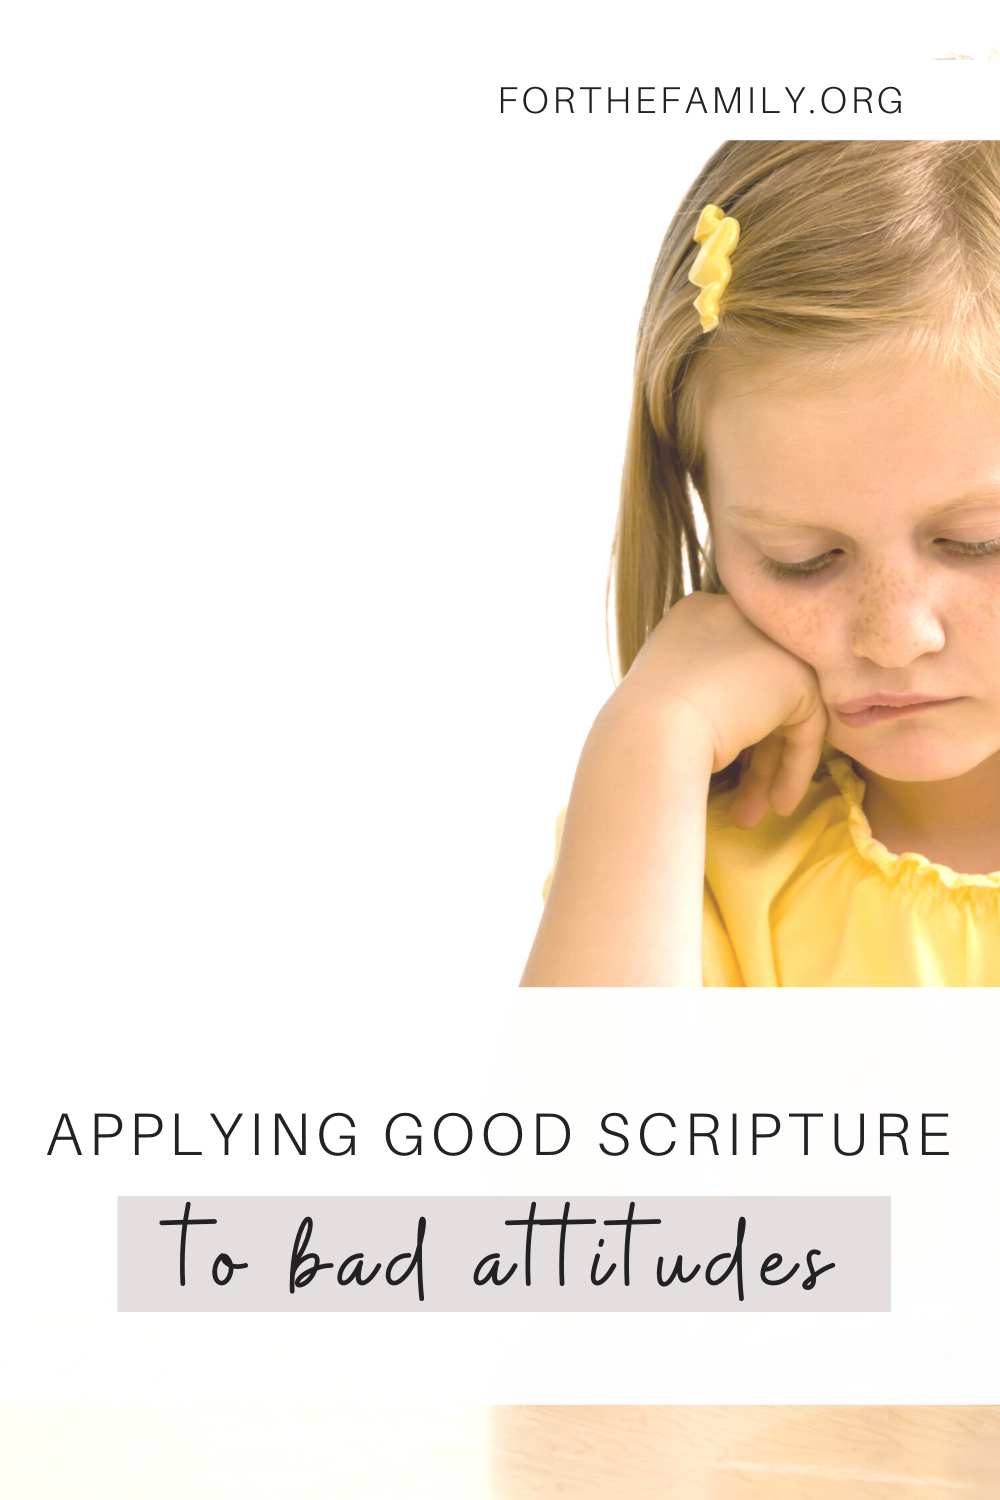 There are plenty of days where my kids are feeling grumpy. But if I'm being honest, they aren't the only ones. A bad attitude can just as easily come from me. So how do we fight the tendency to grumble and complain? Here is how we can apply good Scripture to bad attitudes.